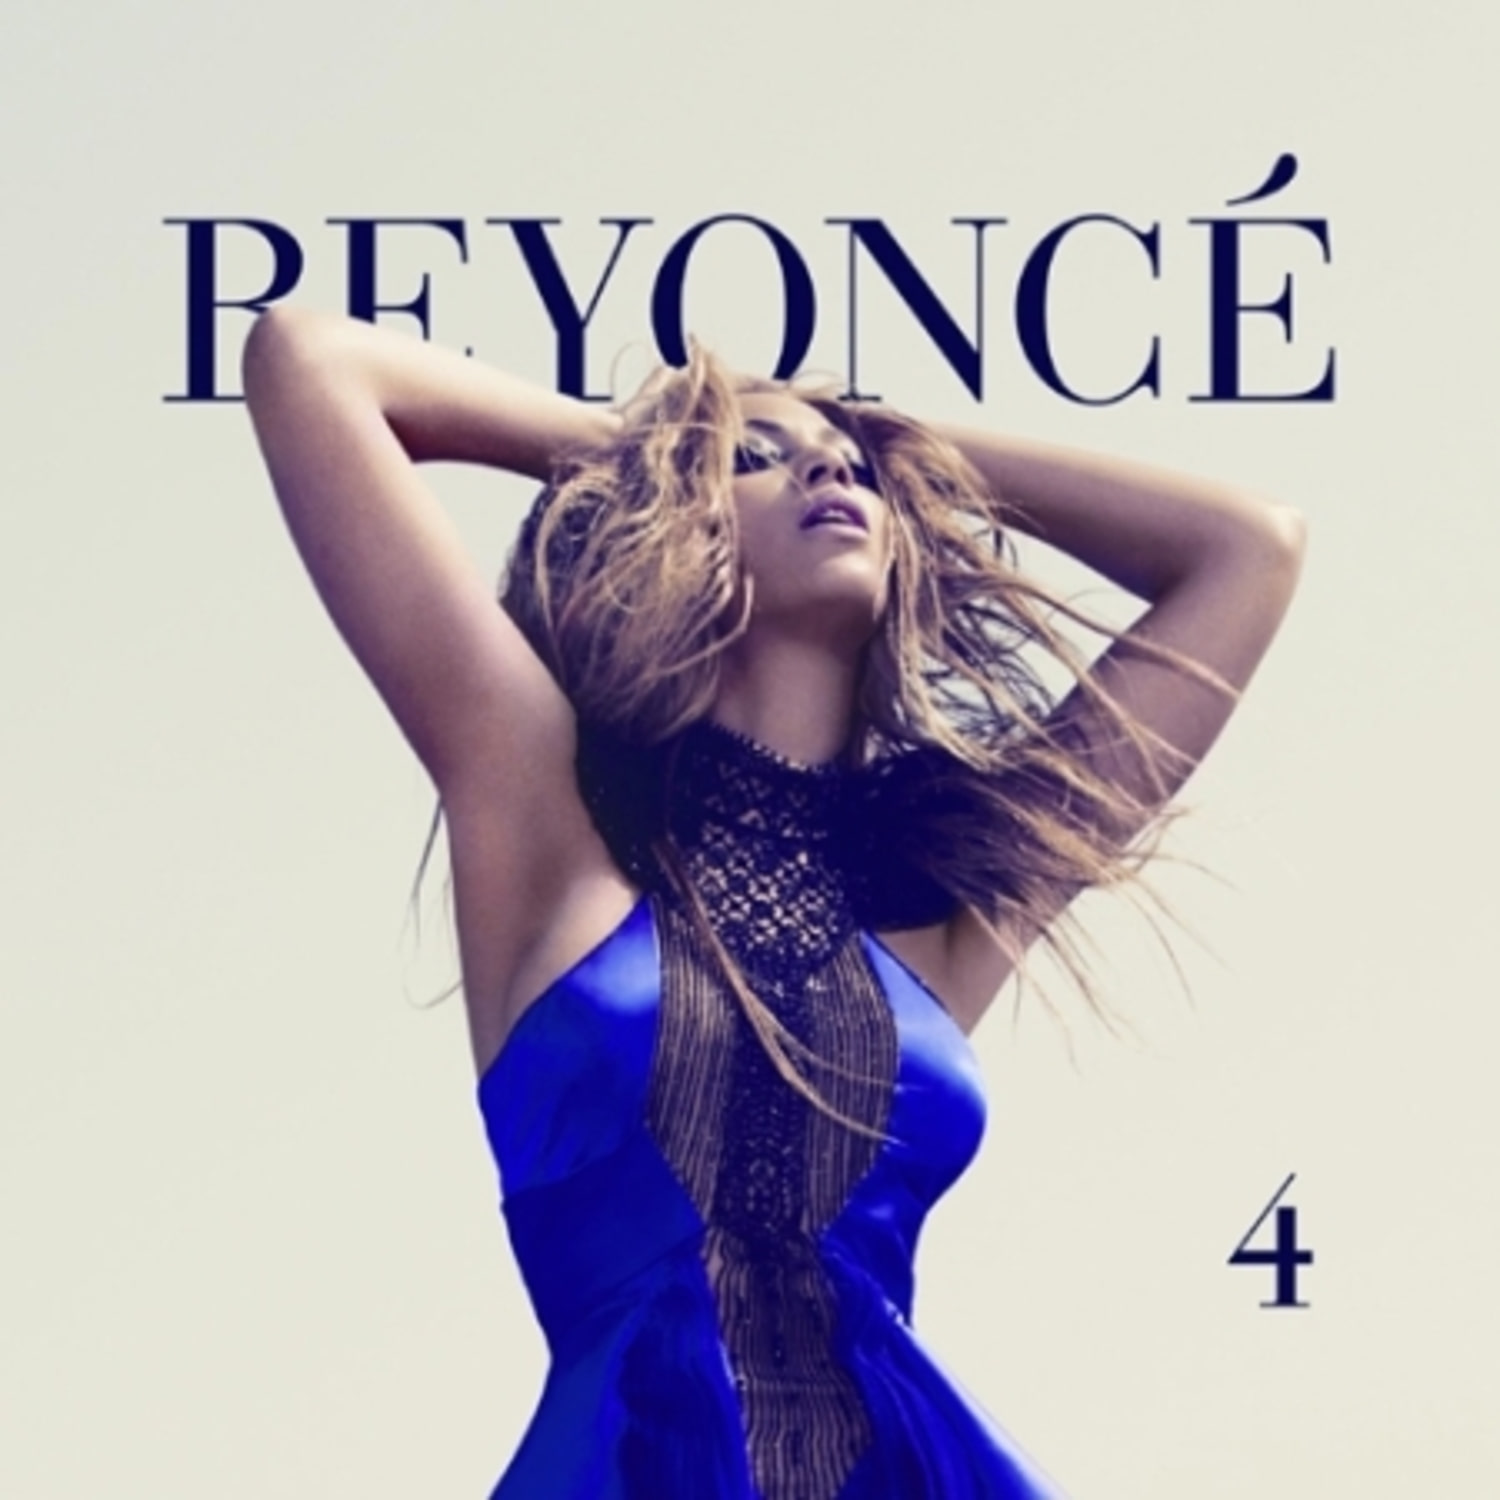 BEYONCE (비욘세) - 4 (DELUXE EDITION) 